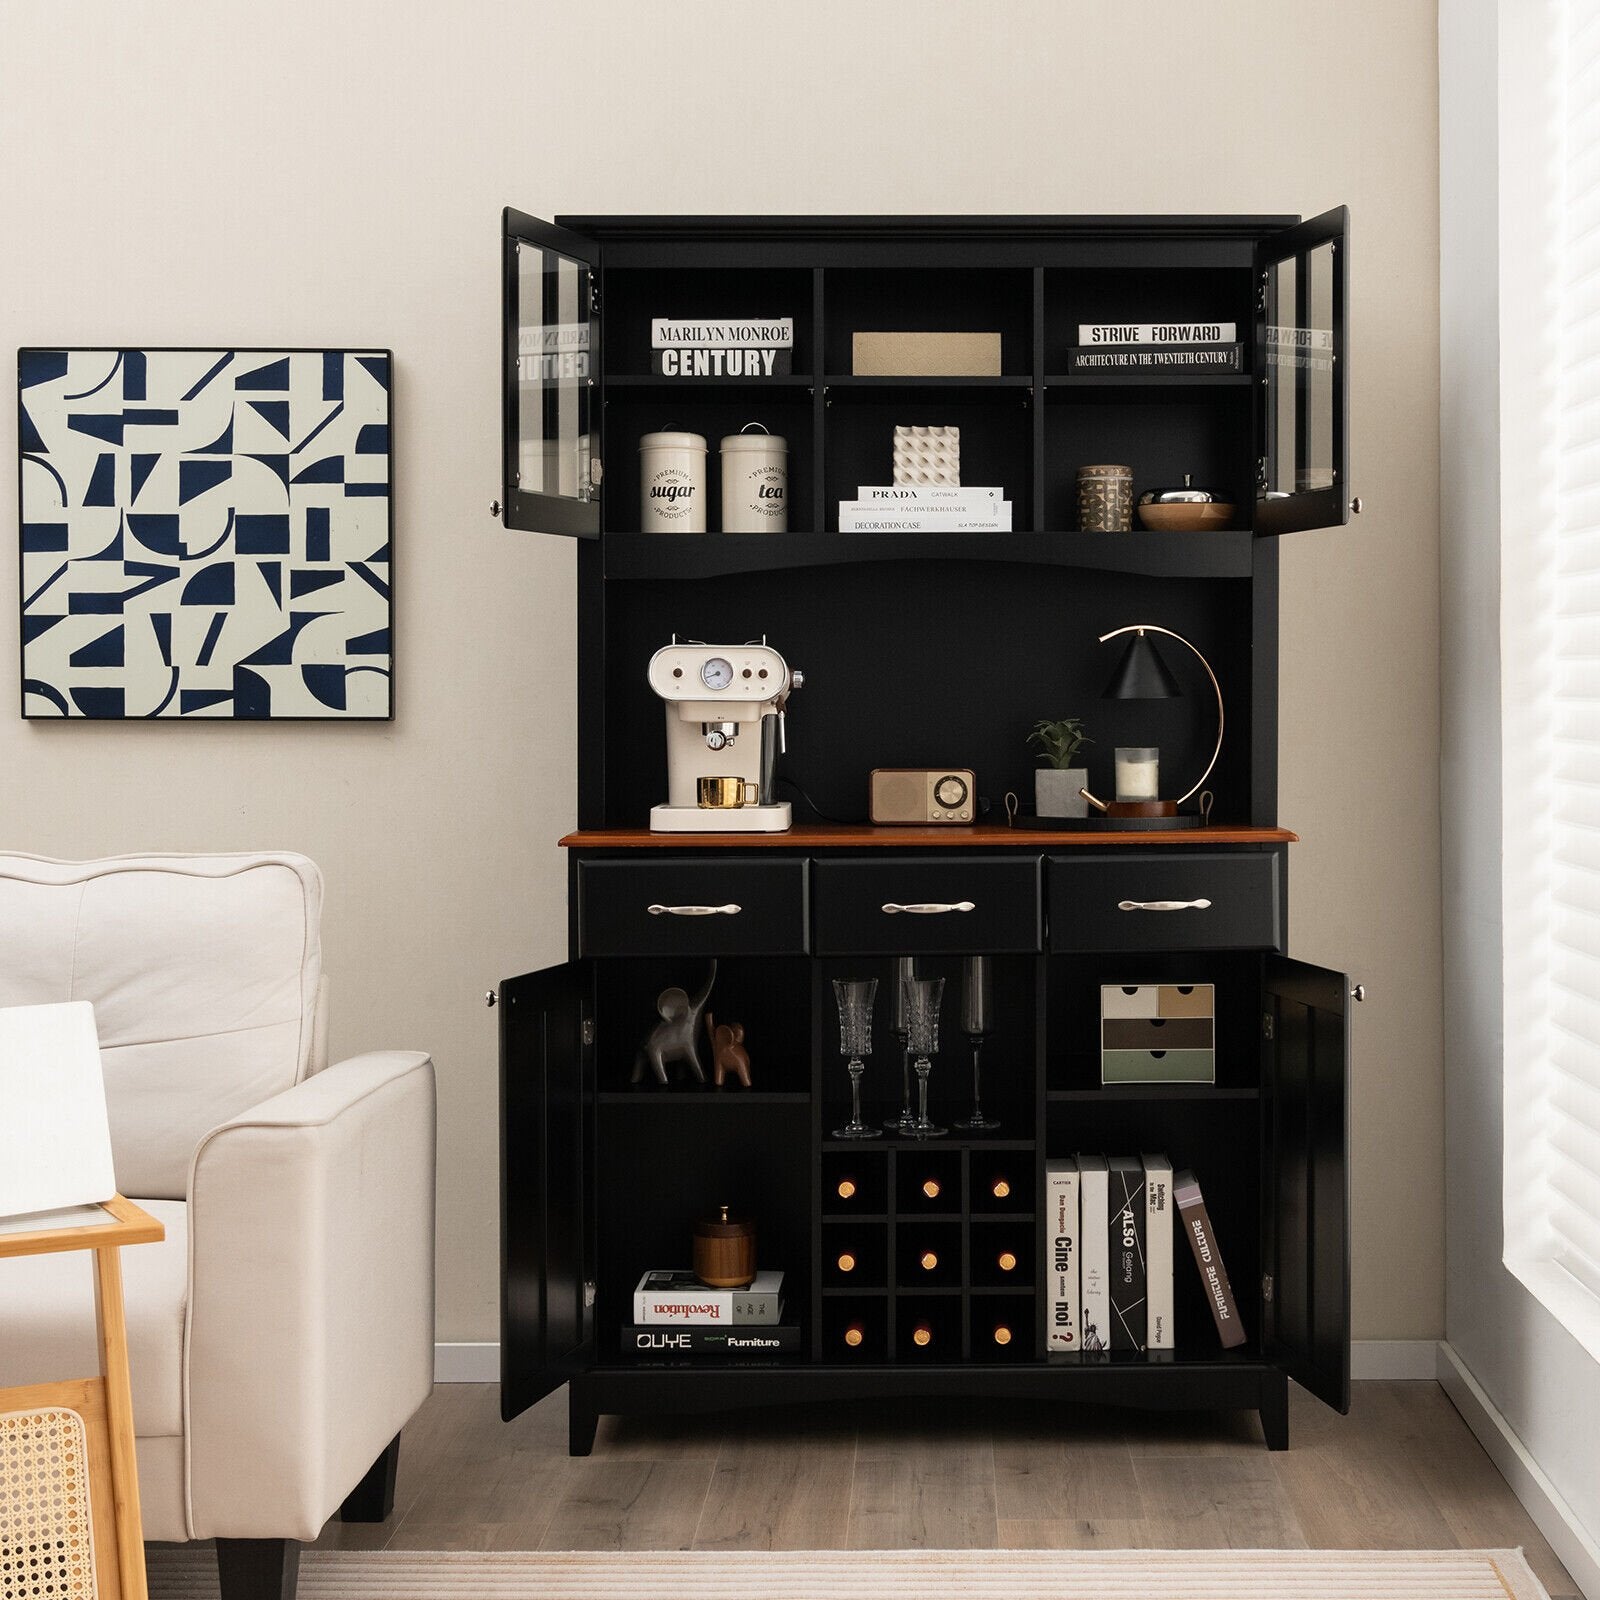 Kitchen Storage Cabinet Cupboard with Wine Rack and Drawers, Black at Gallery Canada